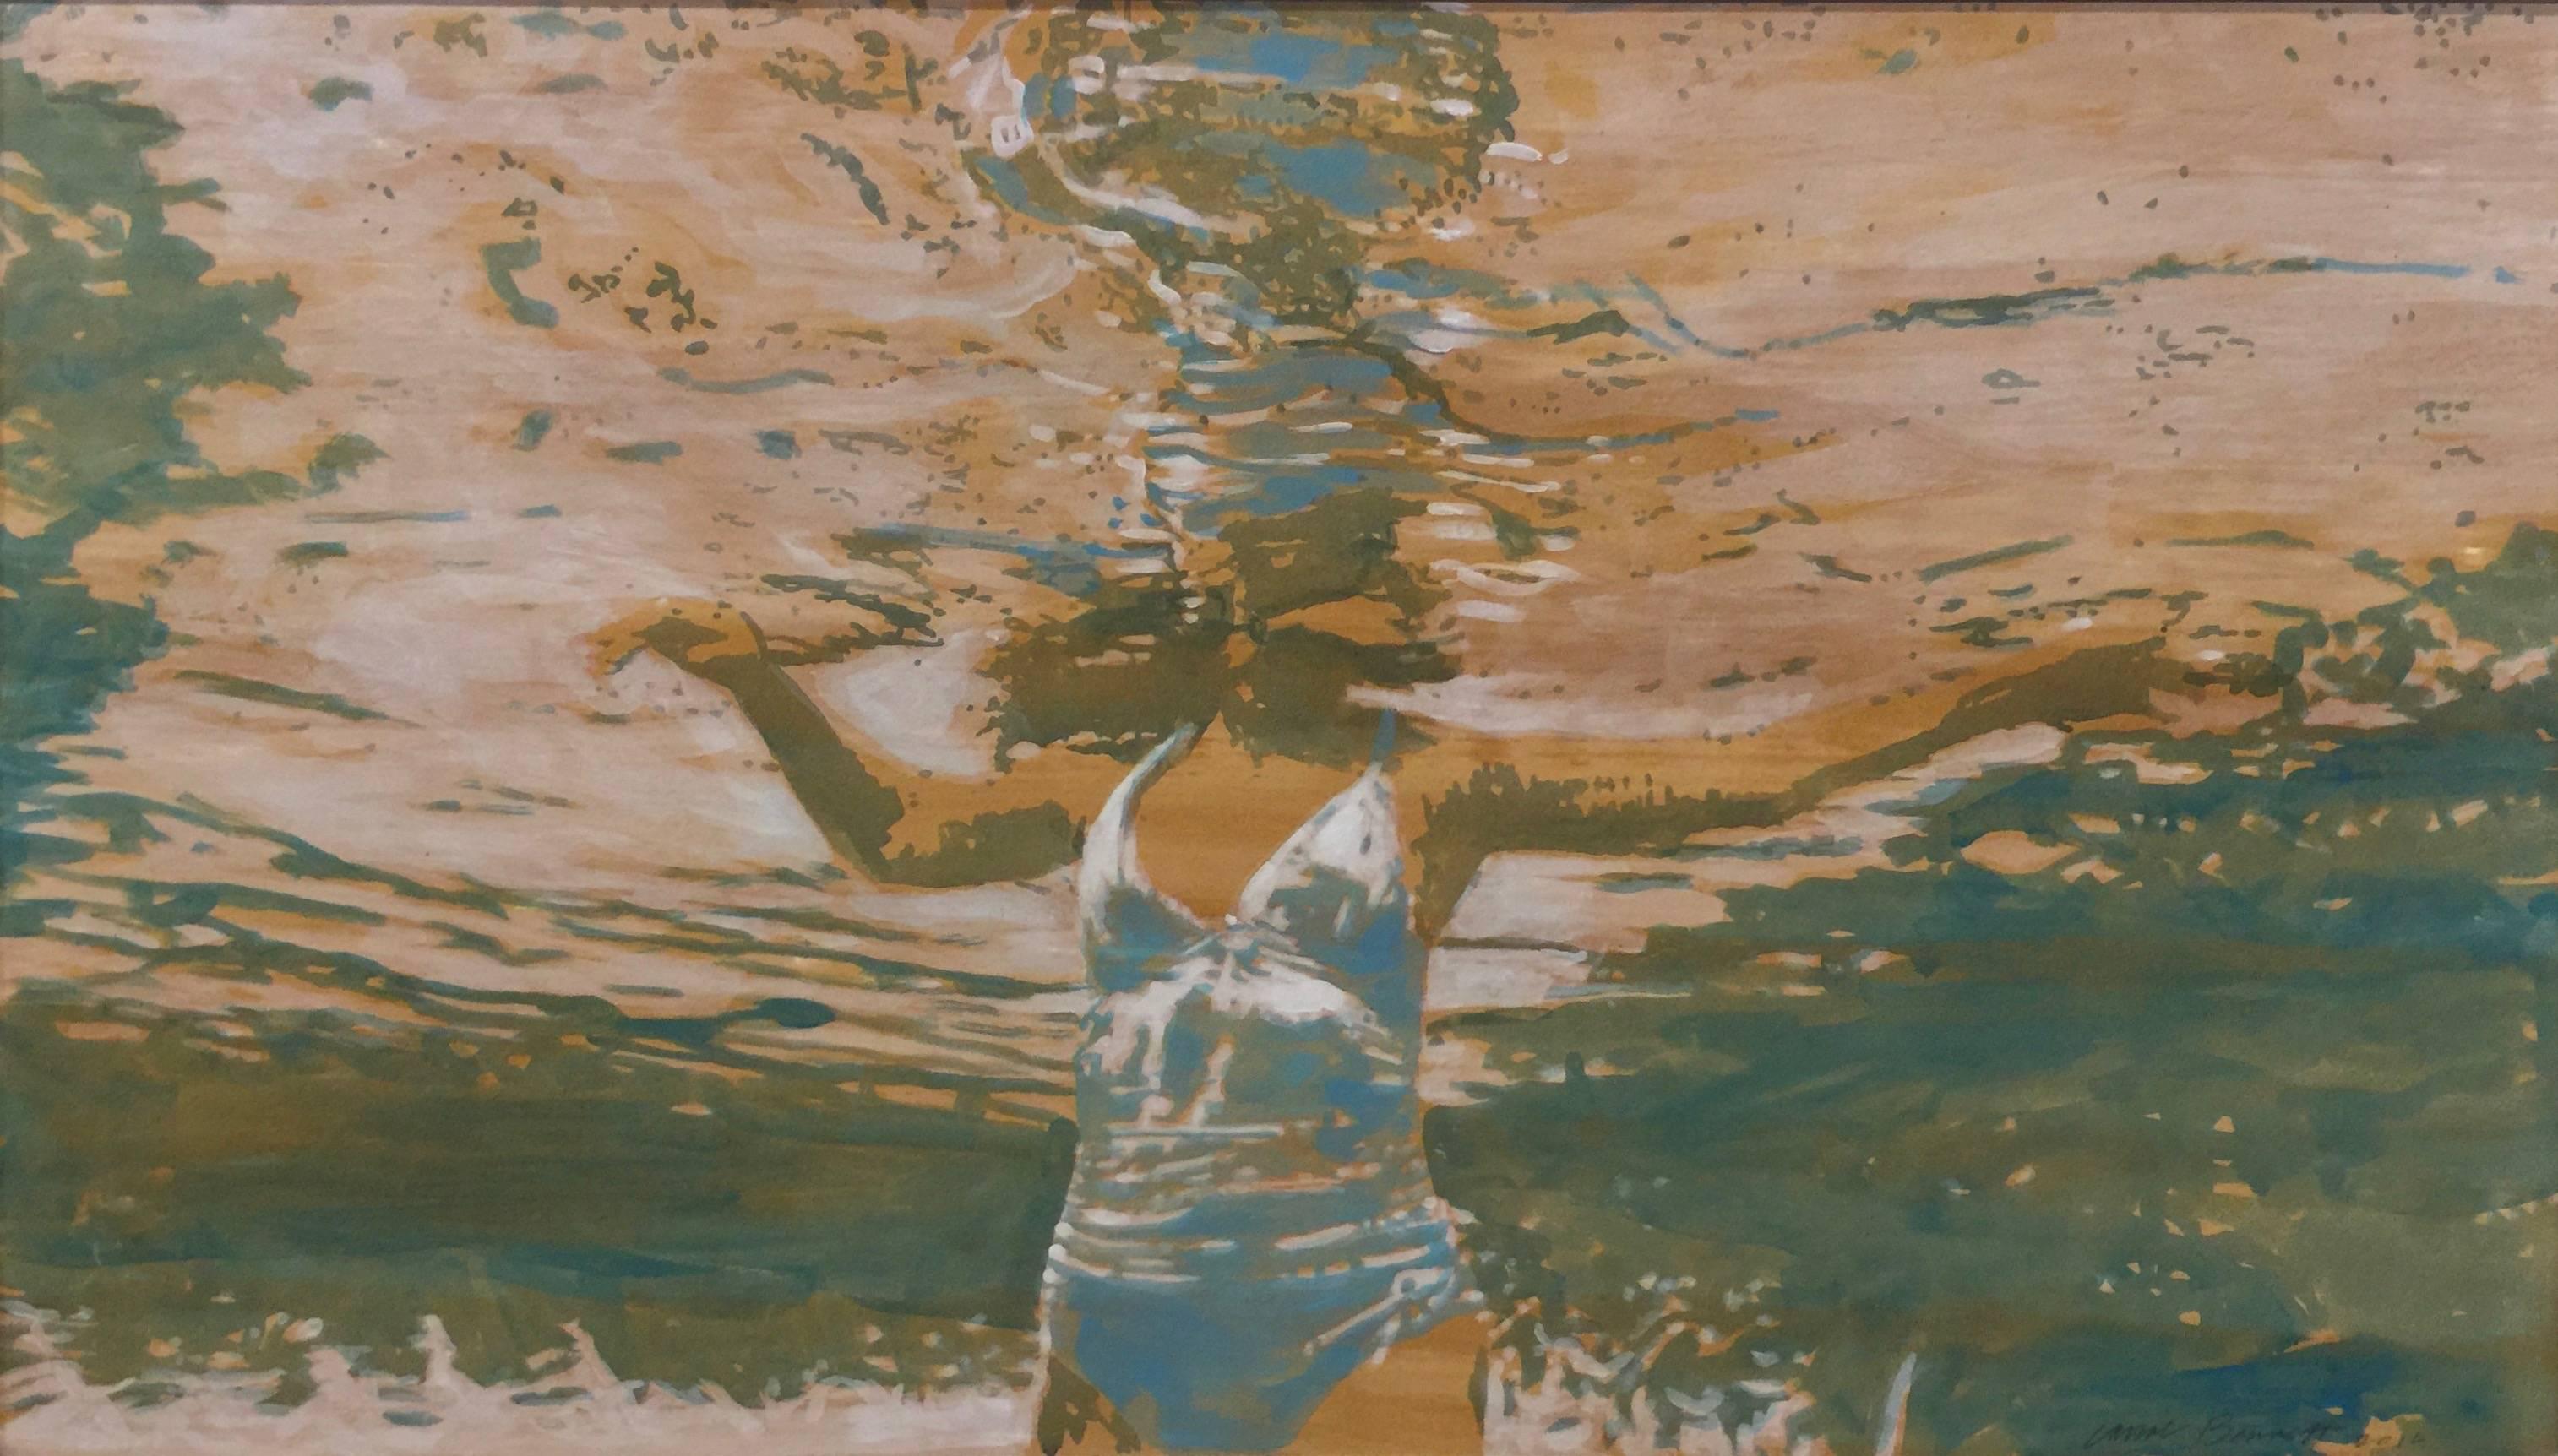 Carol Bennett Landscape Painting - "Pool Chill" Abstract oil painting of a woman in a white swimsuit in a blue pool